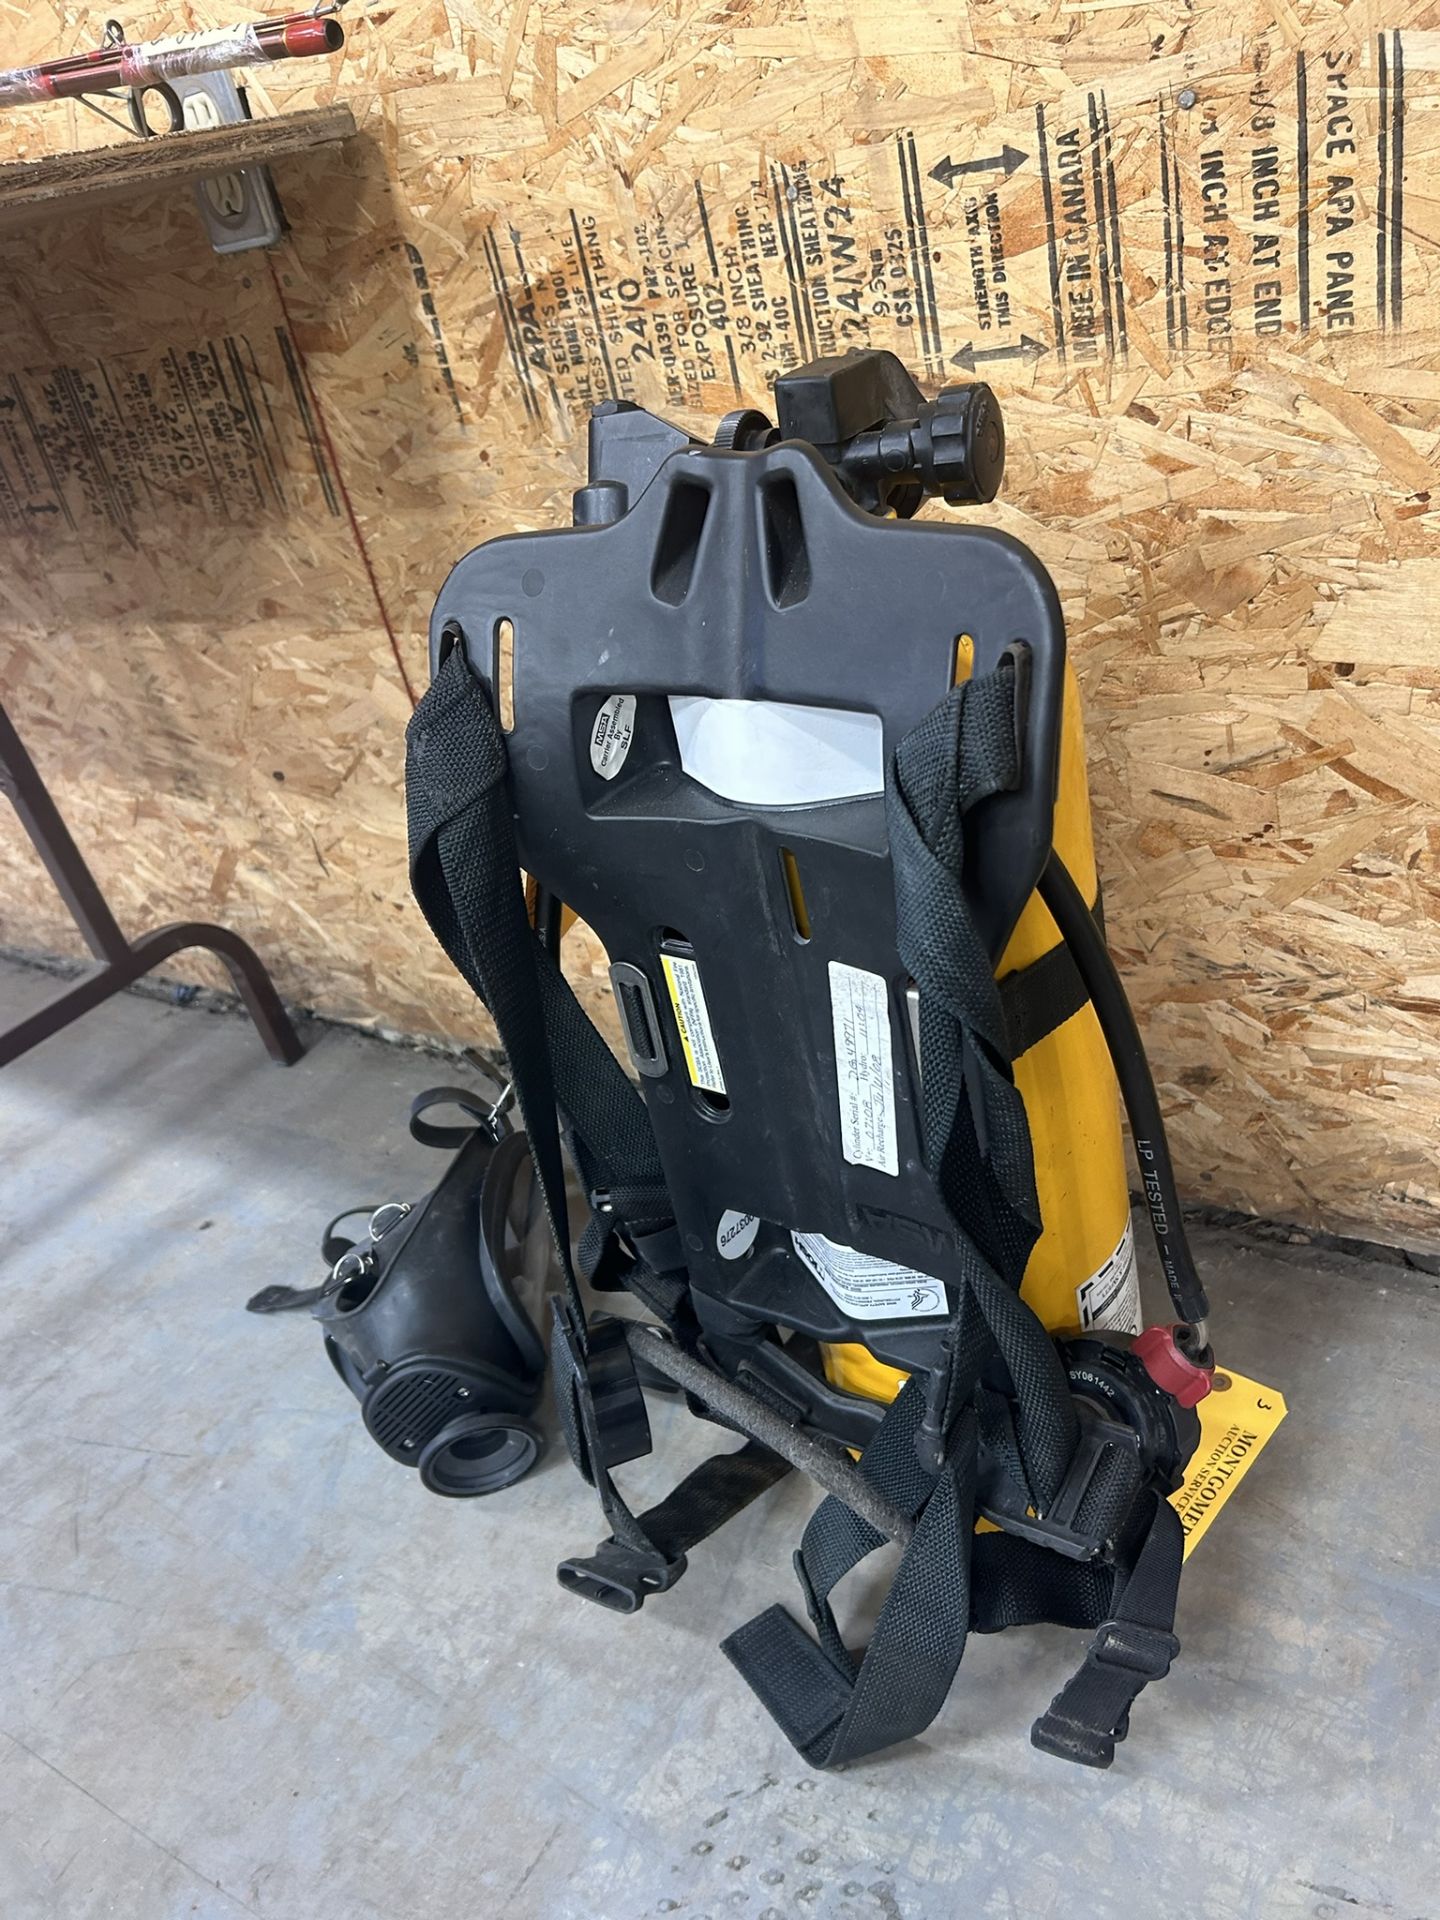 SCABA TANK, MASK AND BACK PACK HARNESS - Image 2 of 3